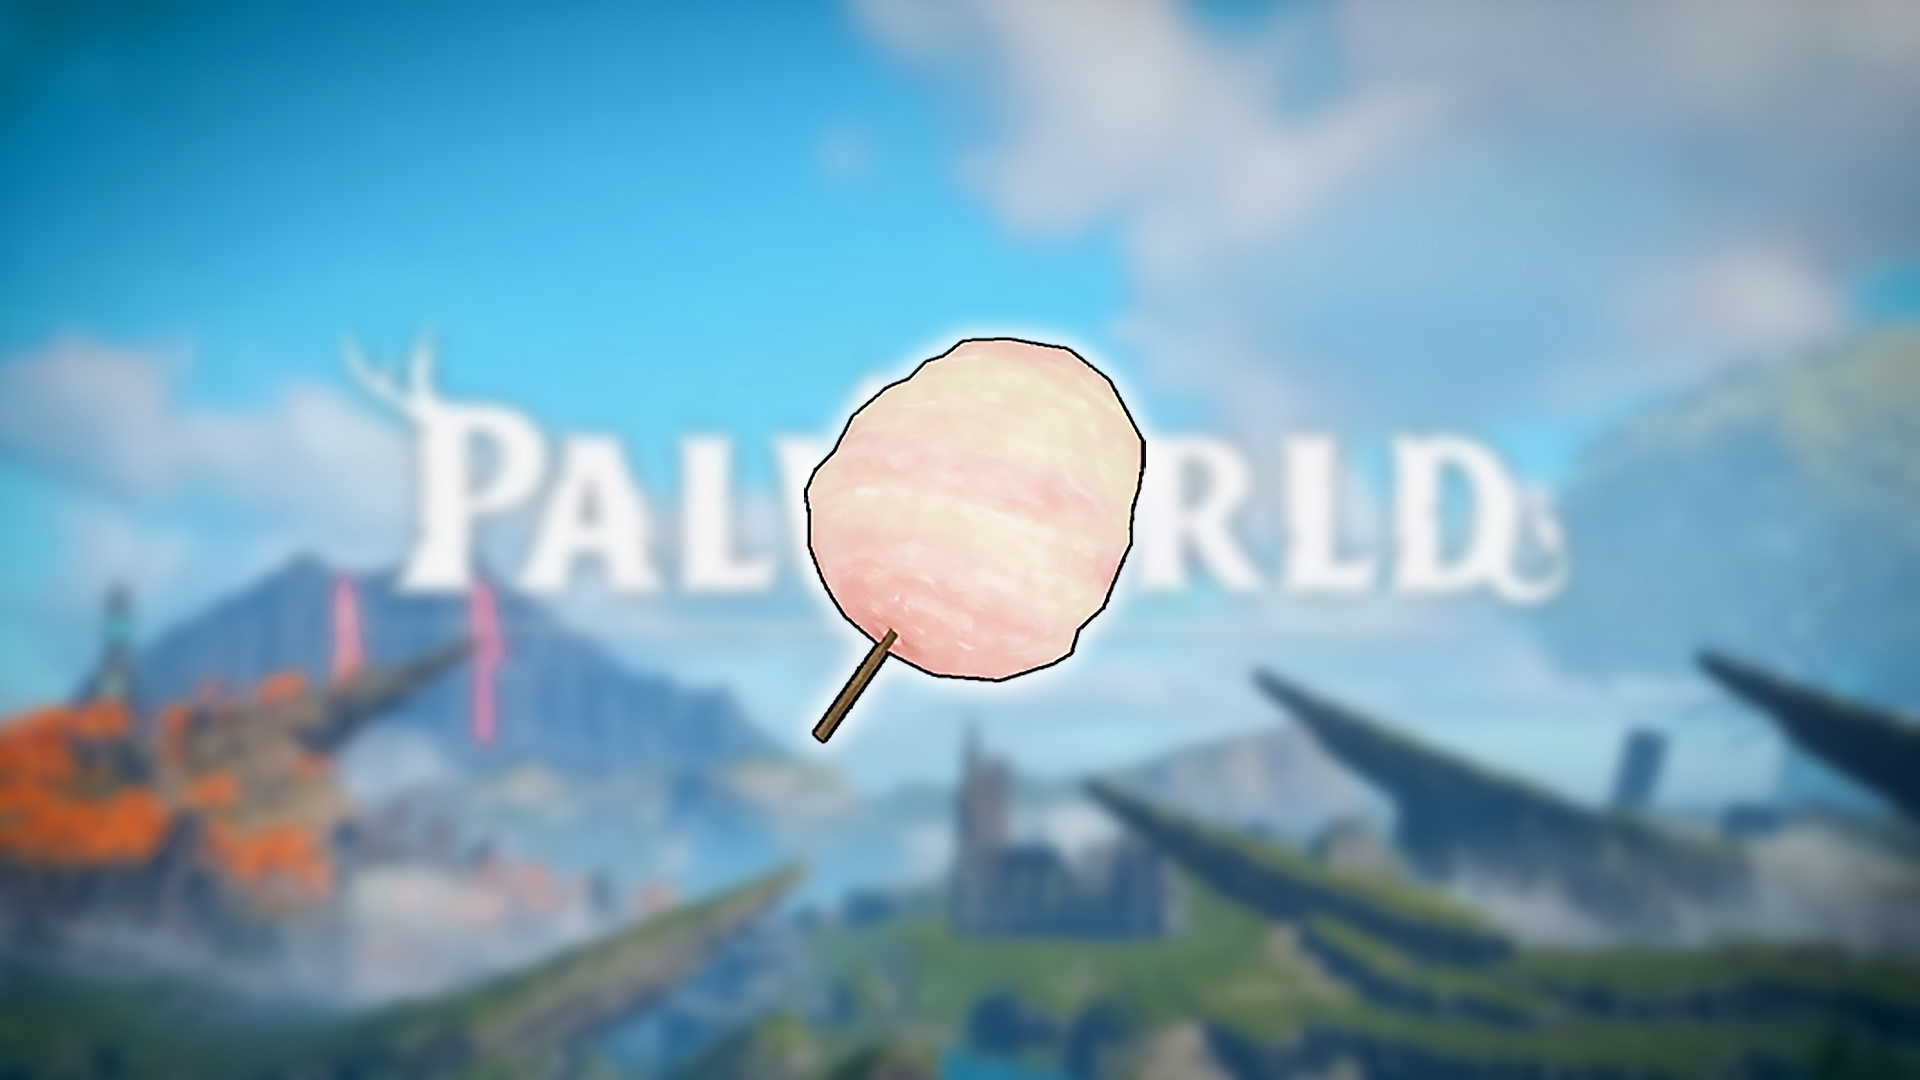 How to get cotton candy in Palworld